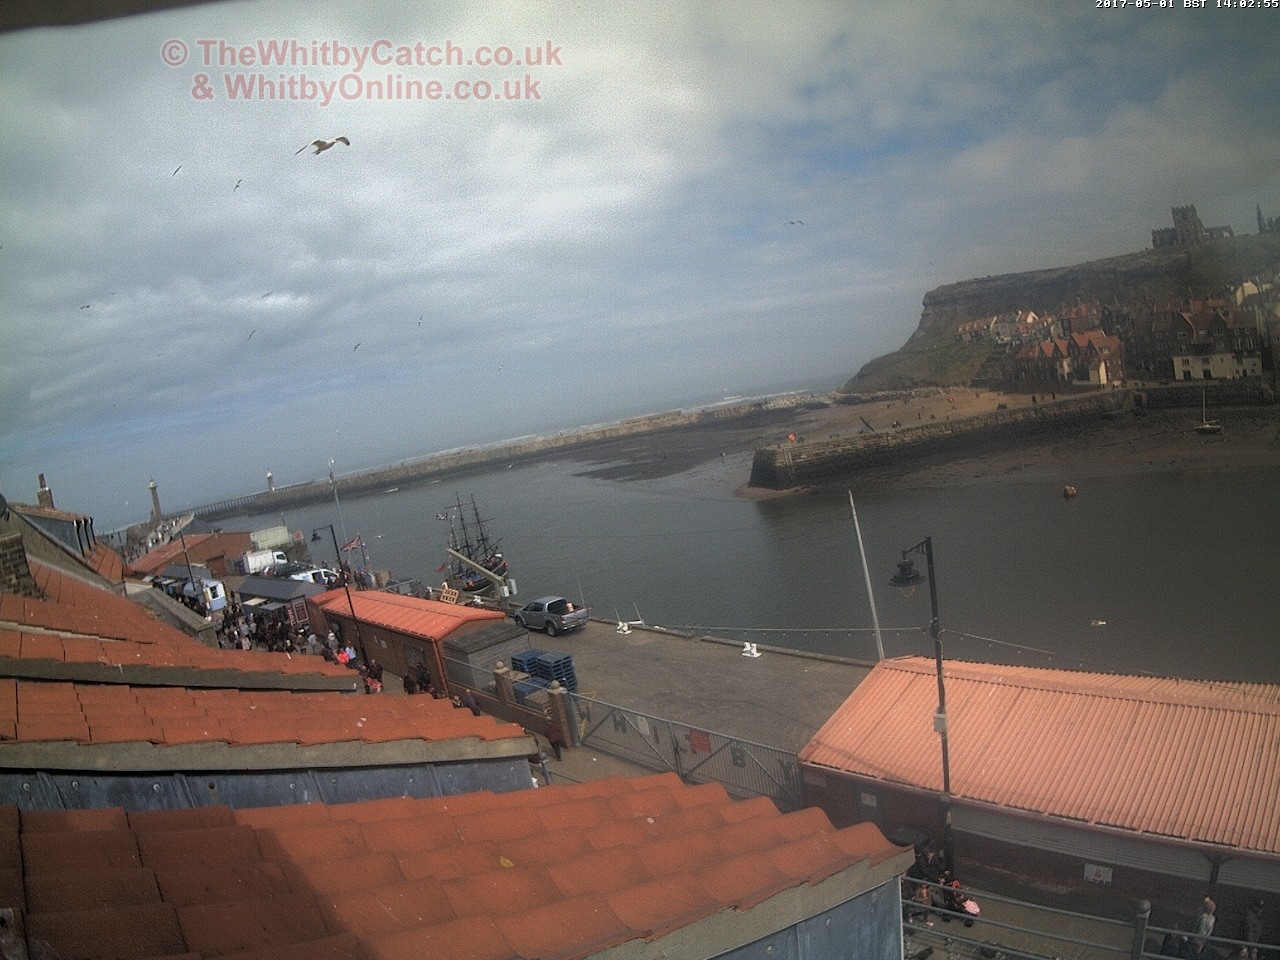 Whitby Mon 1st May 2017 14:03.